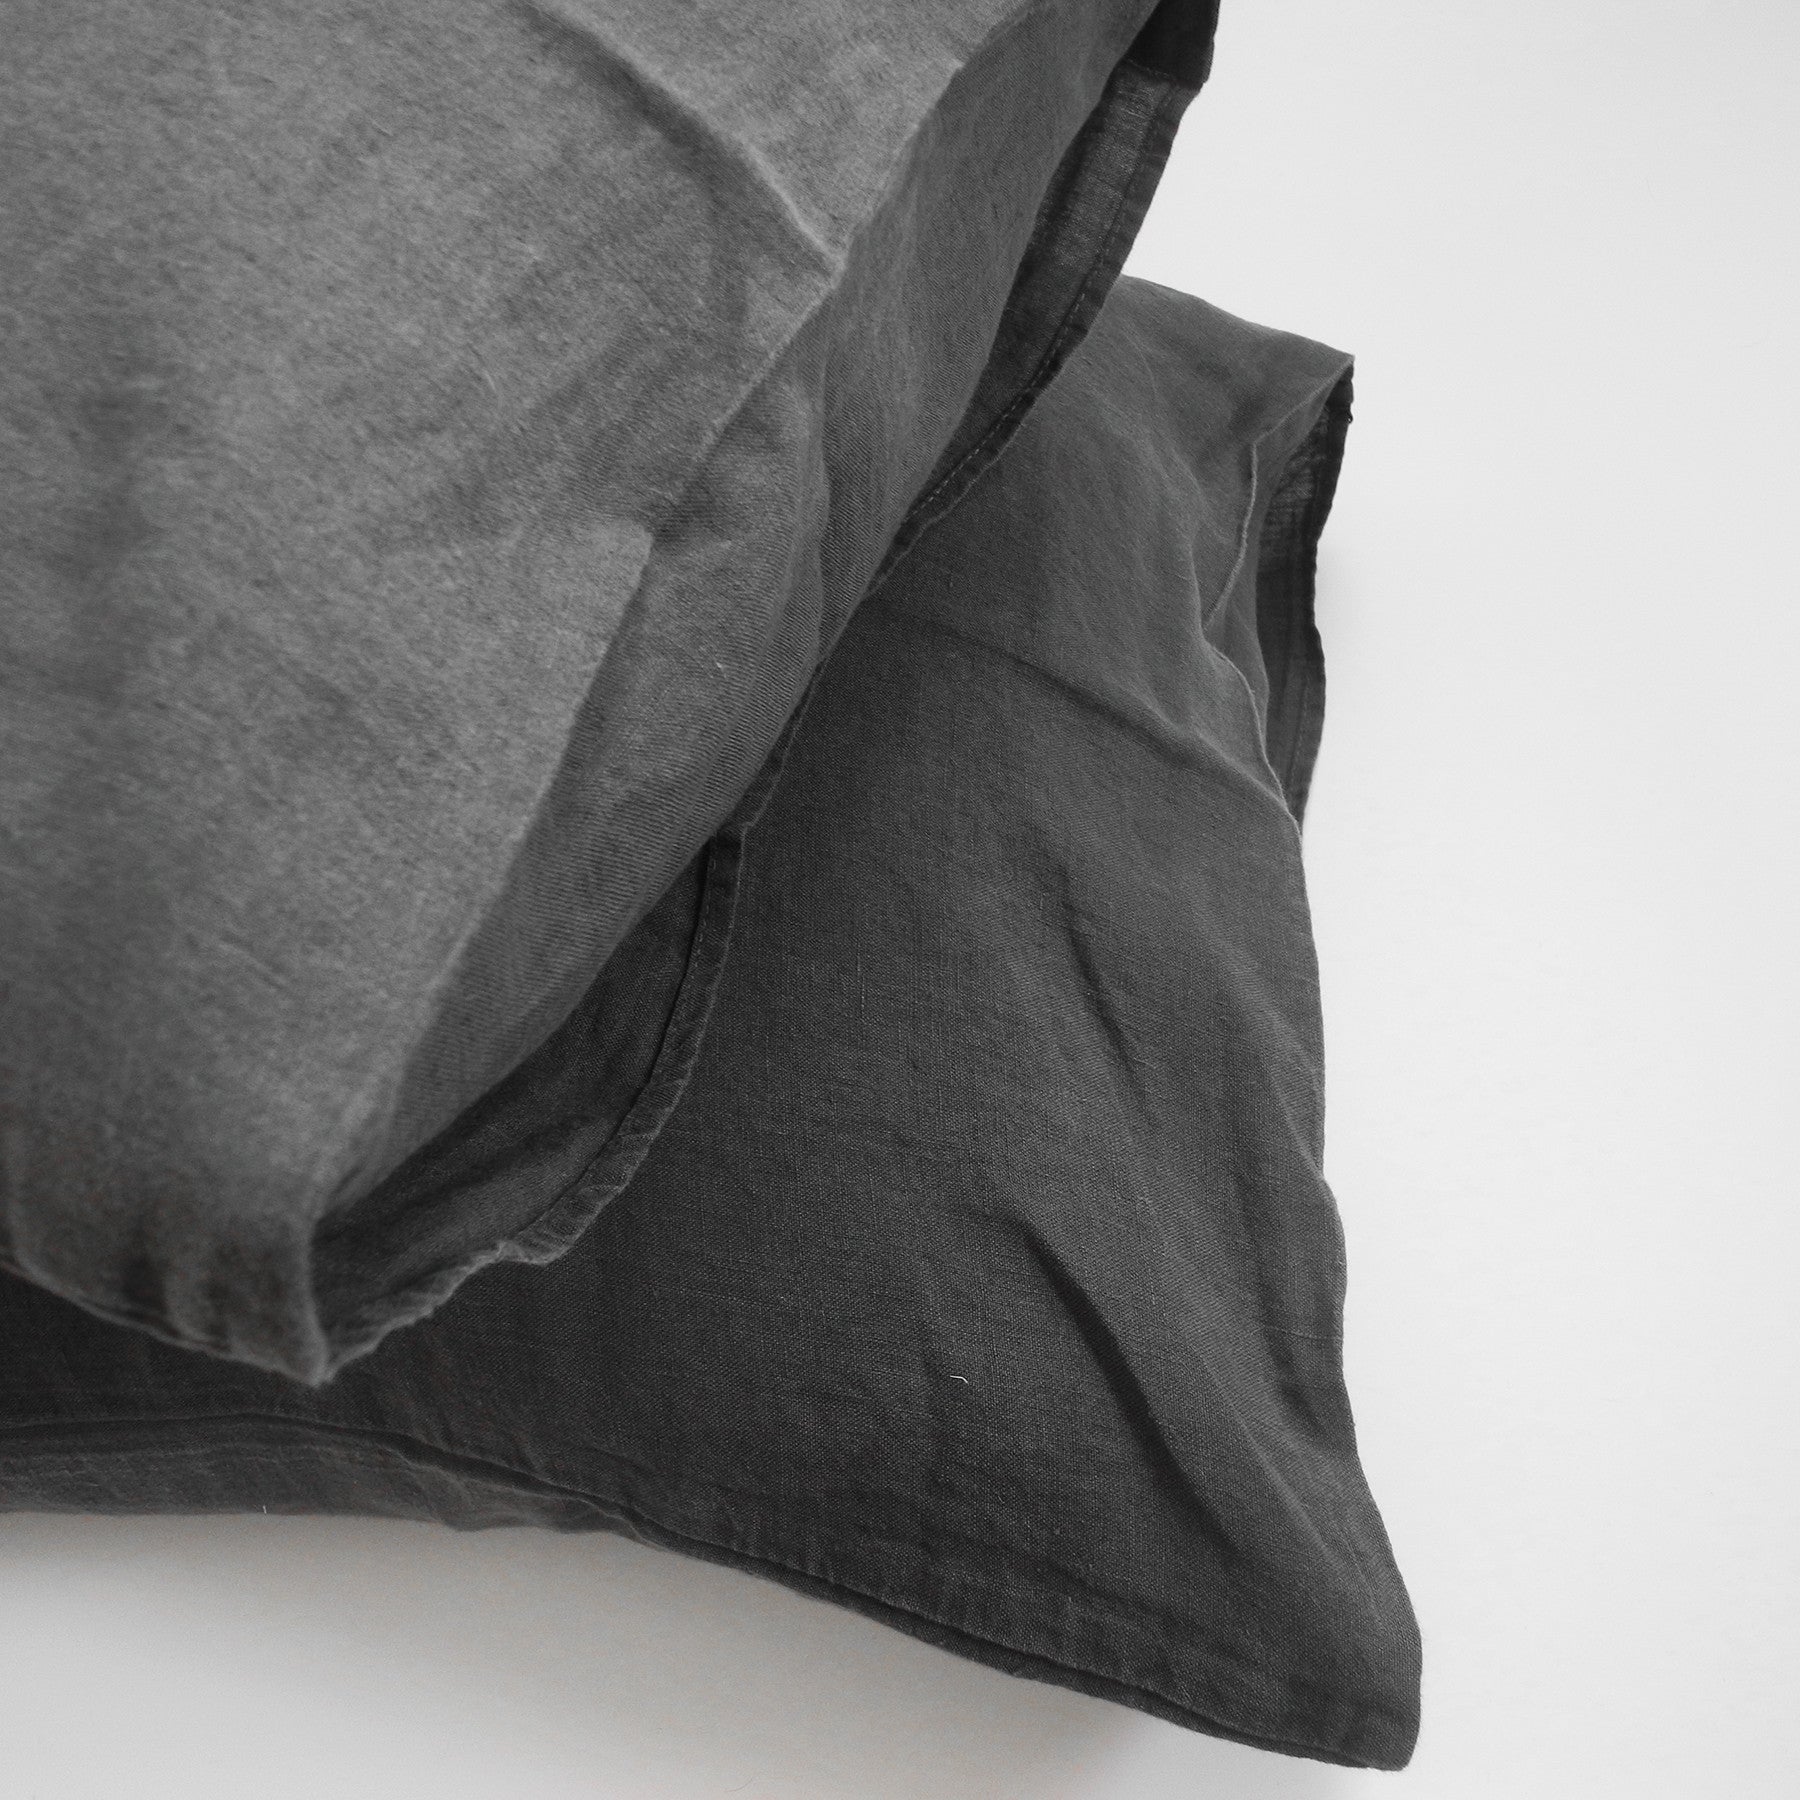 Linge Particulier Storm Grey Standard Linen Pillowcase Sham for a colorful linen bedding look in charcoal grey - Collyer's Mansion